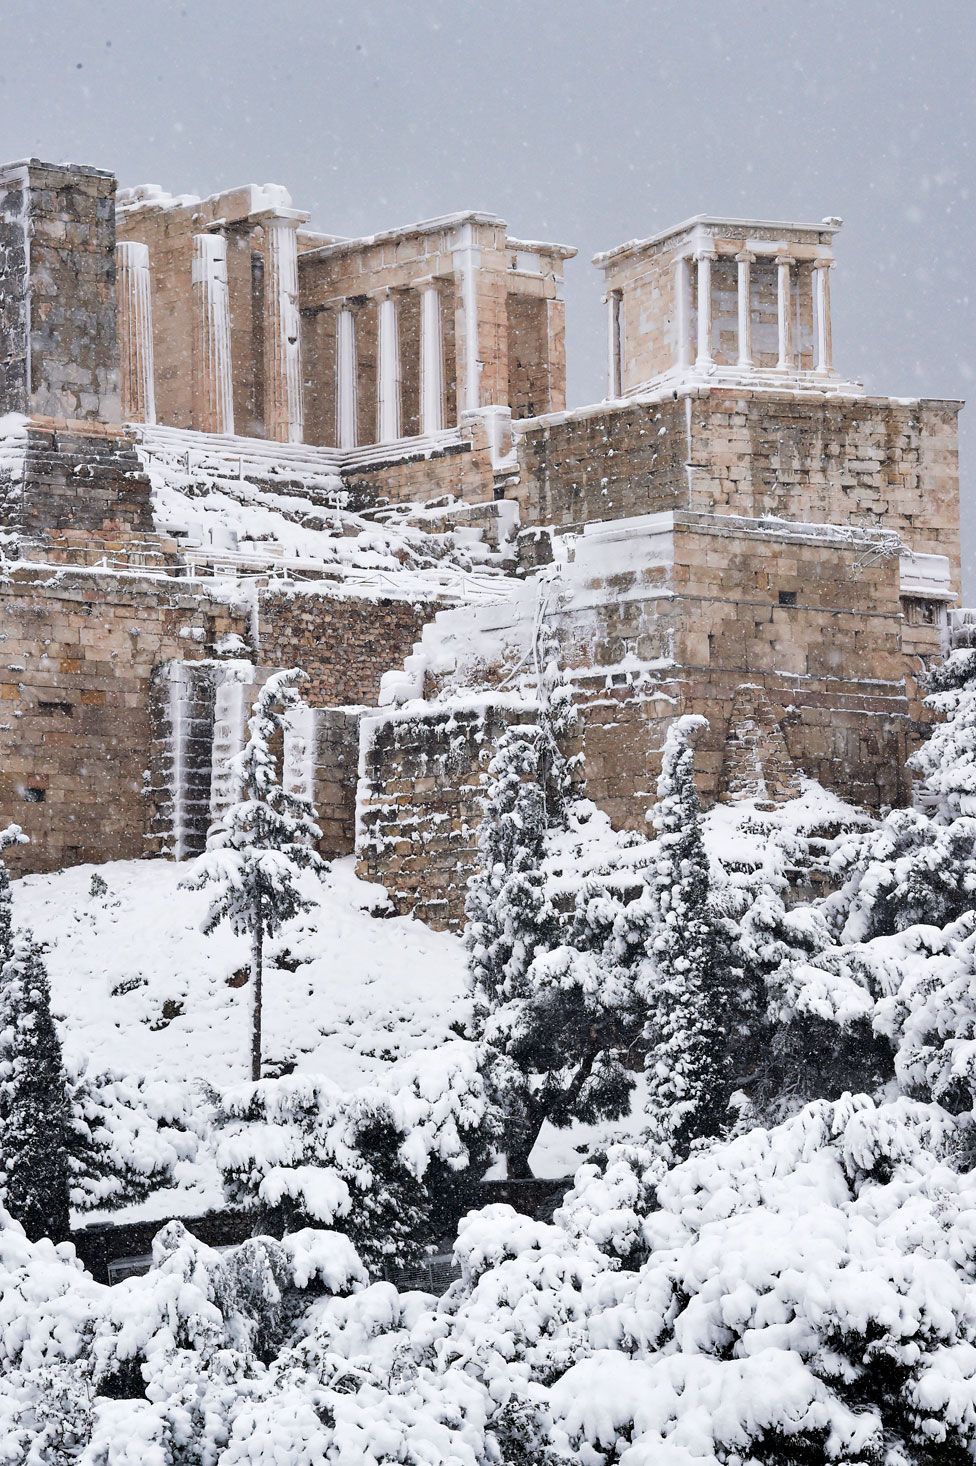 Snow falls on ancient ruins in Athens